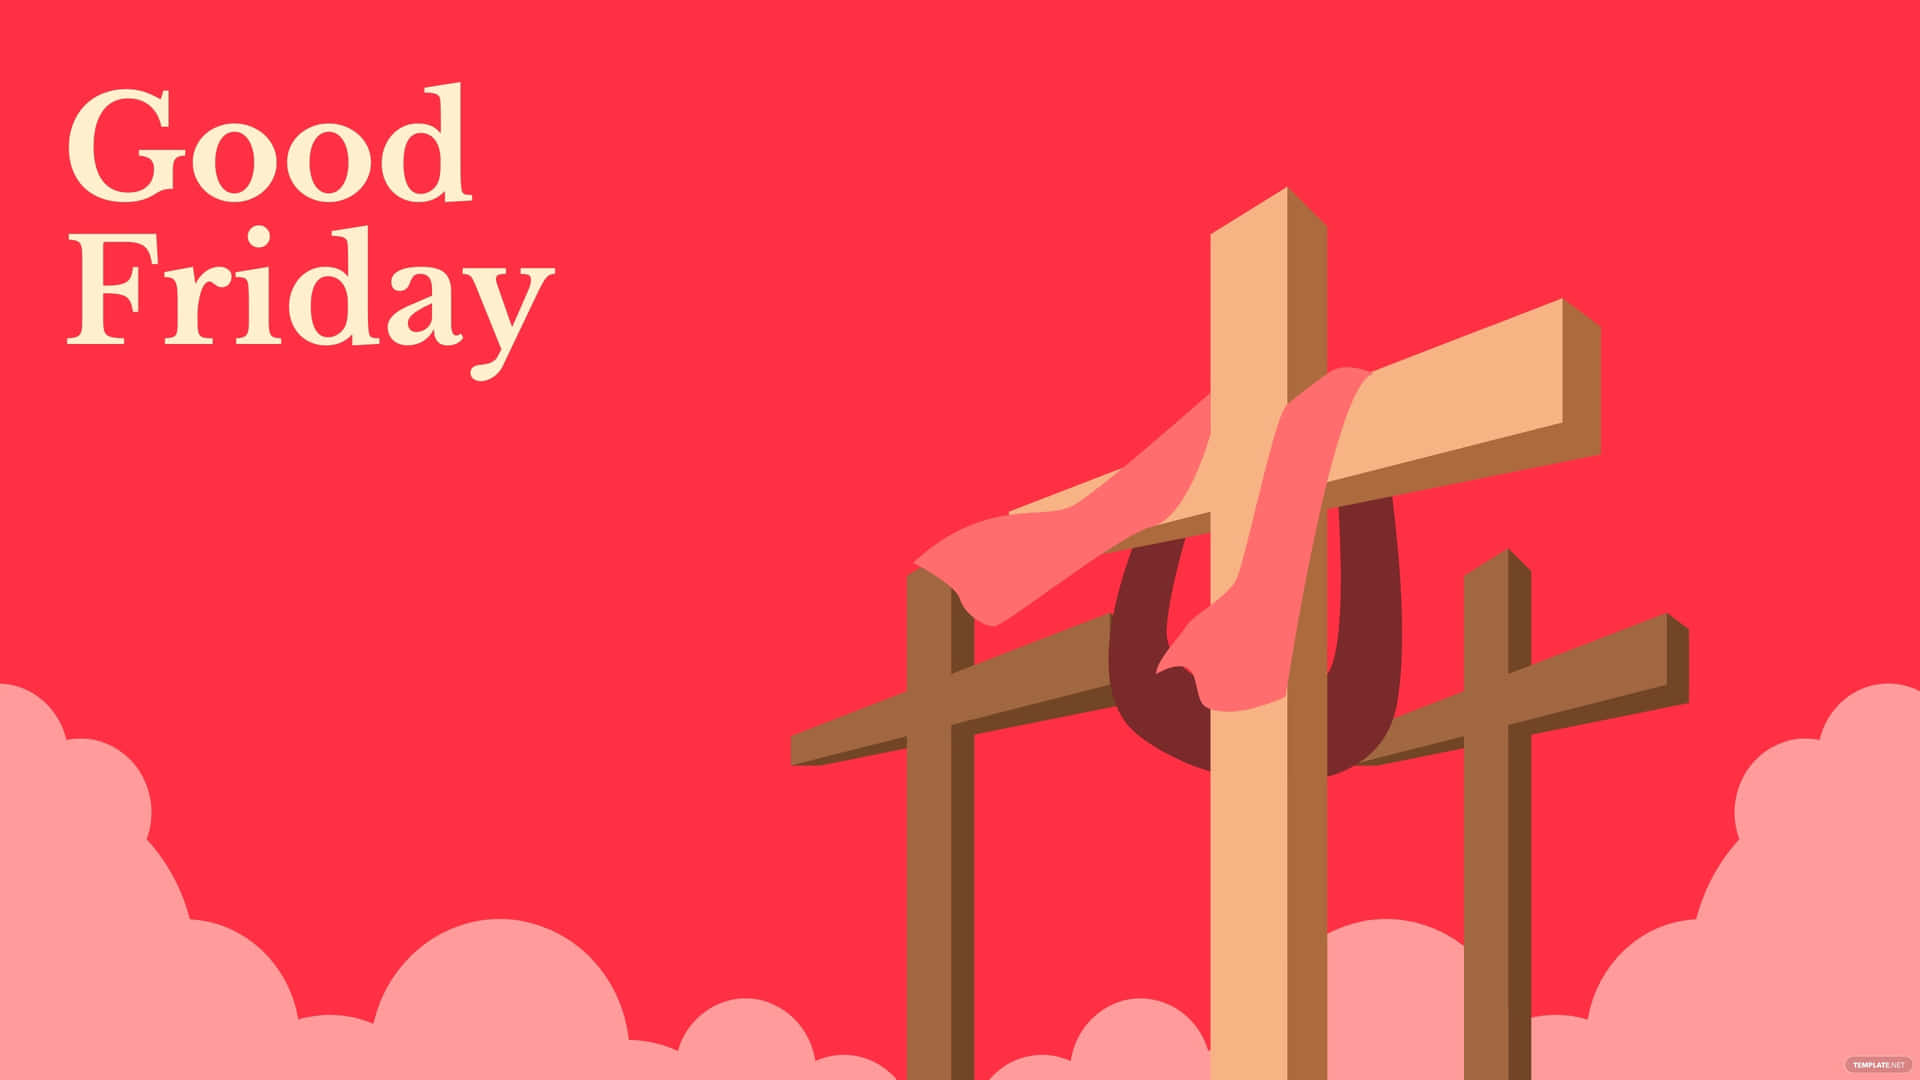 Good Friday - a day to Reflect